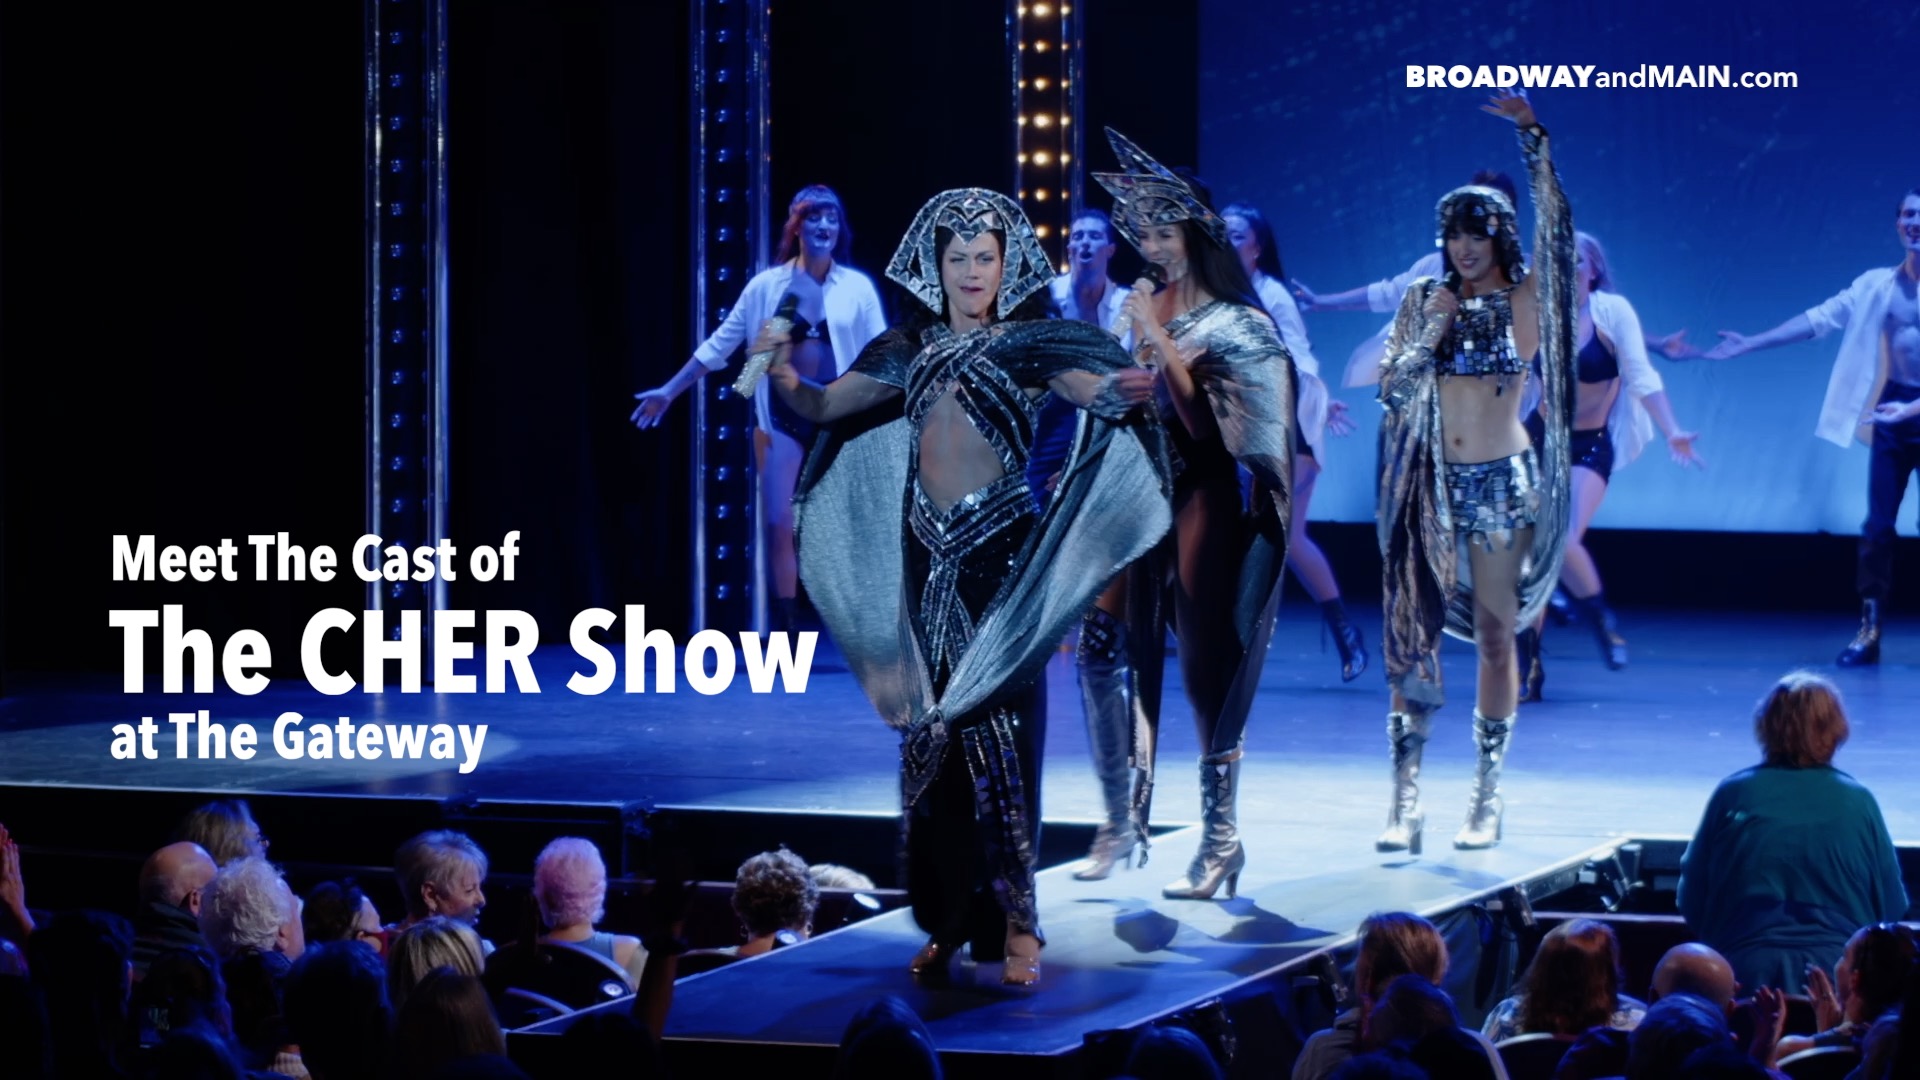 Meet The Cast of The Cher Show at The Gateway